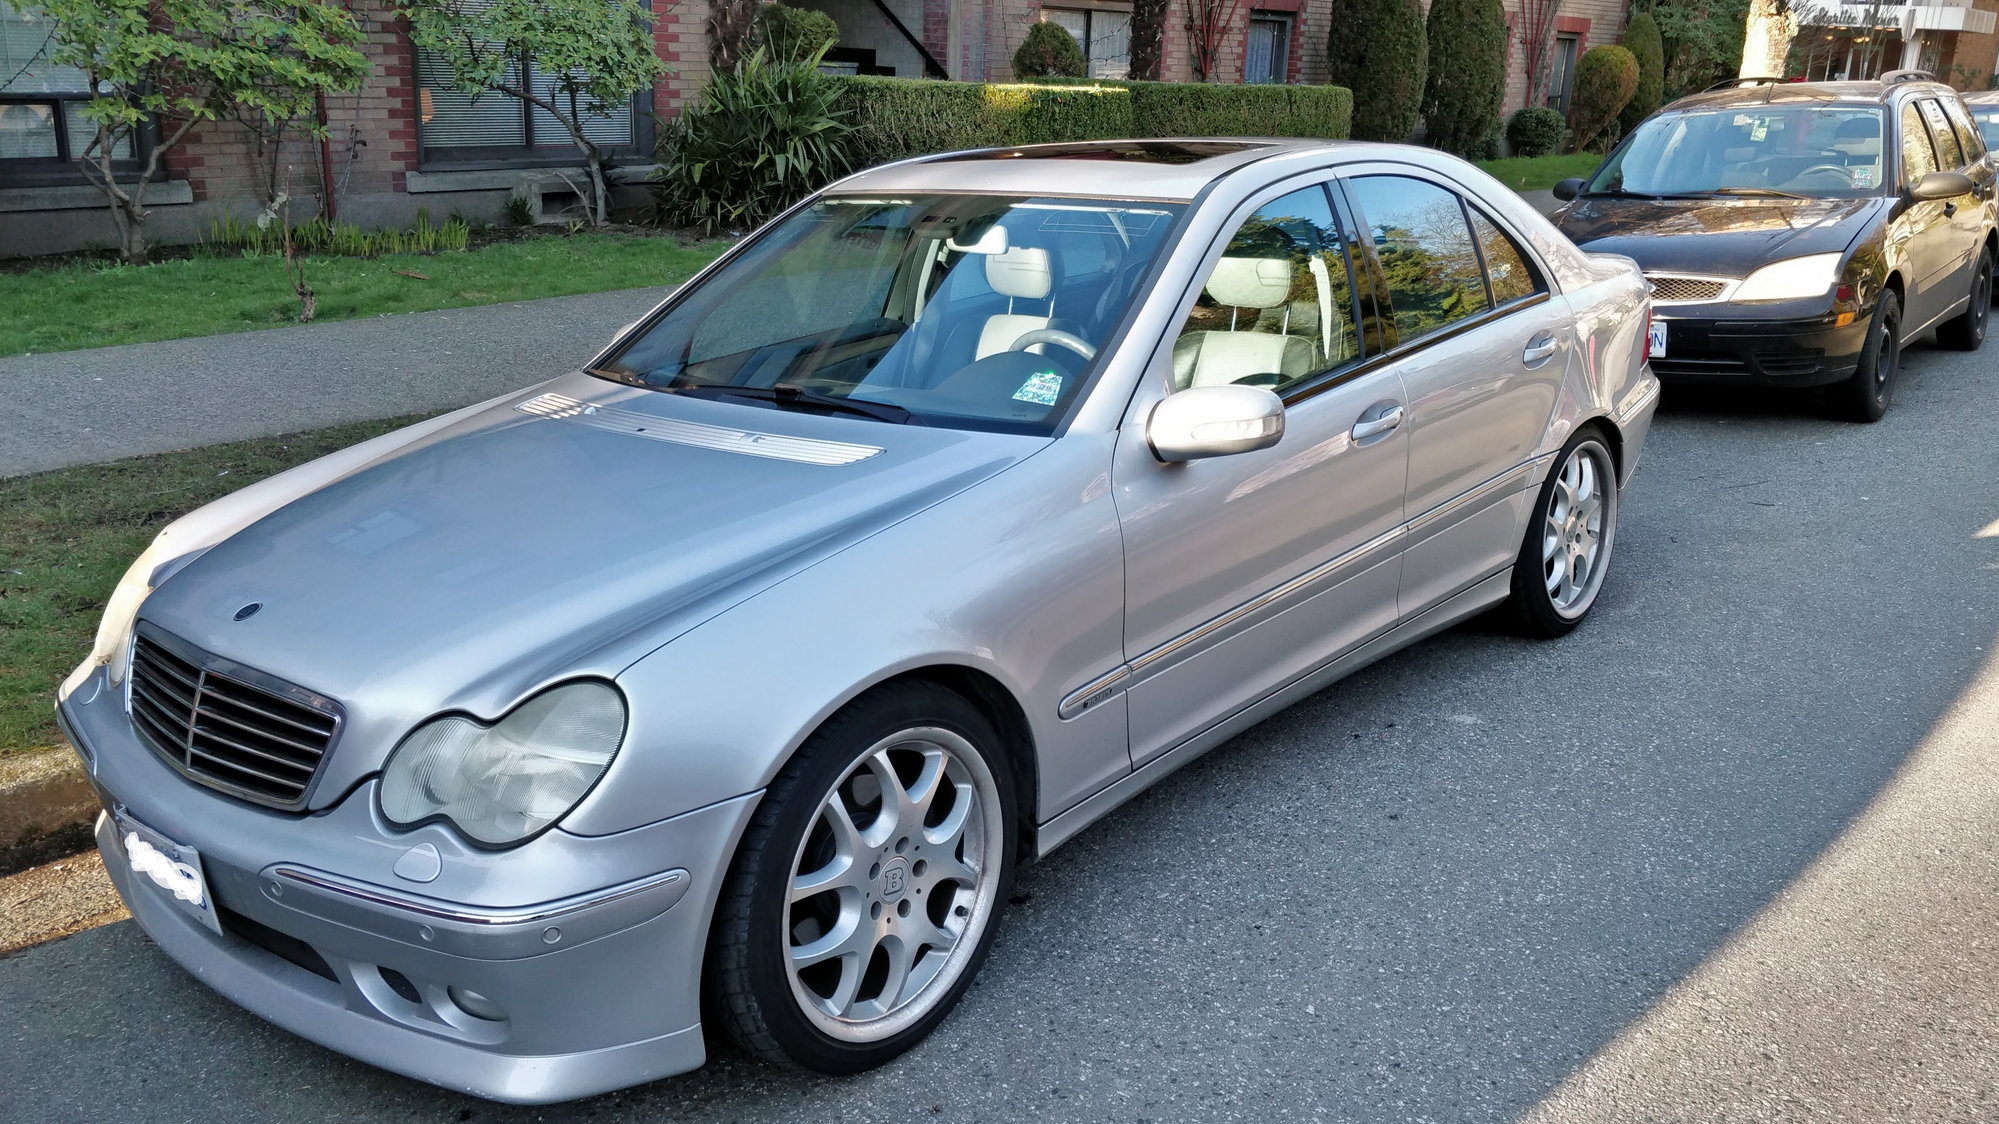 2002 Mercedes-Benz C32 AMG - 2001 Brabus C3.8S - Used - VIN WDB2030641A103088 - 75,000 Miles - 6 cyl - 2WD - Automatic - Silver - Vancouver, BC V5L1E1, Canada